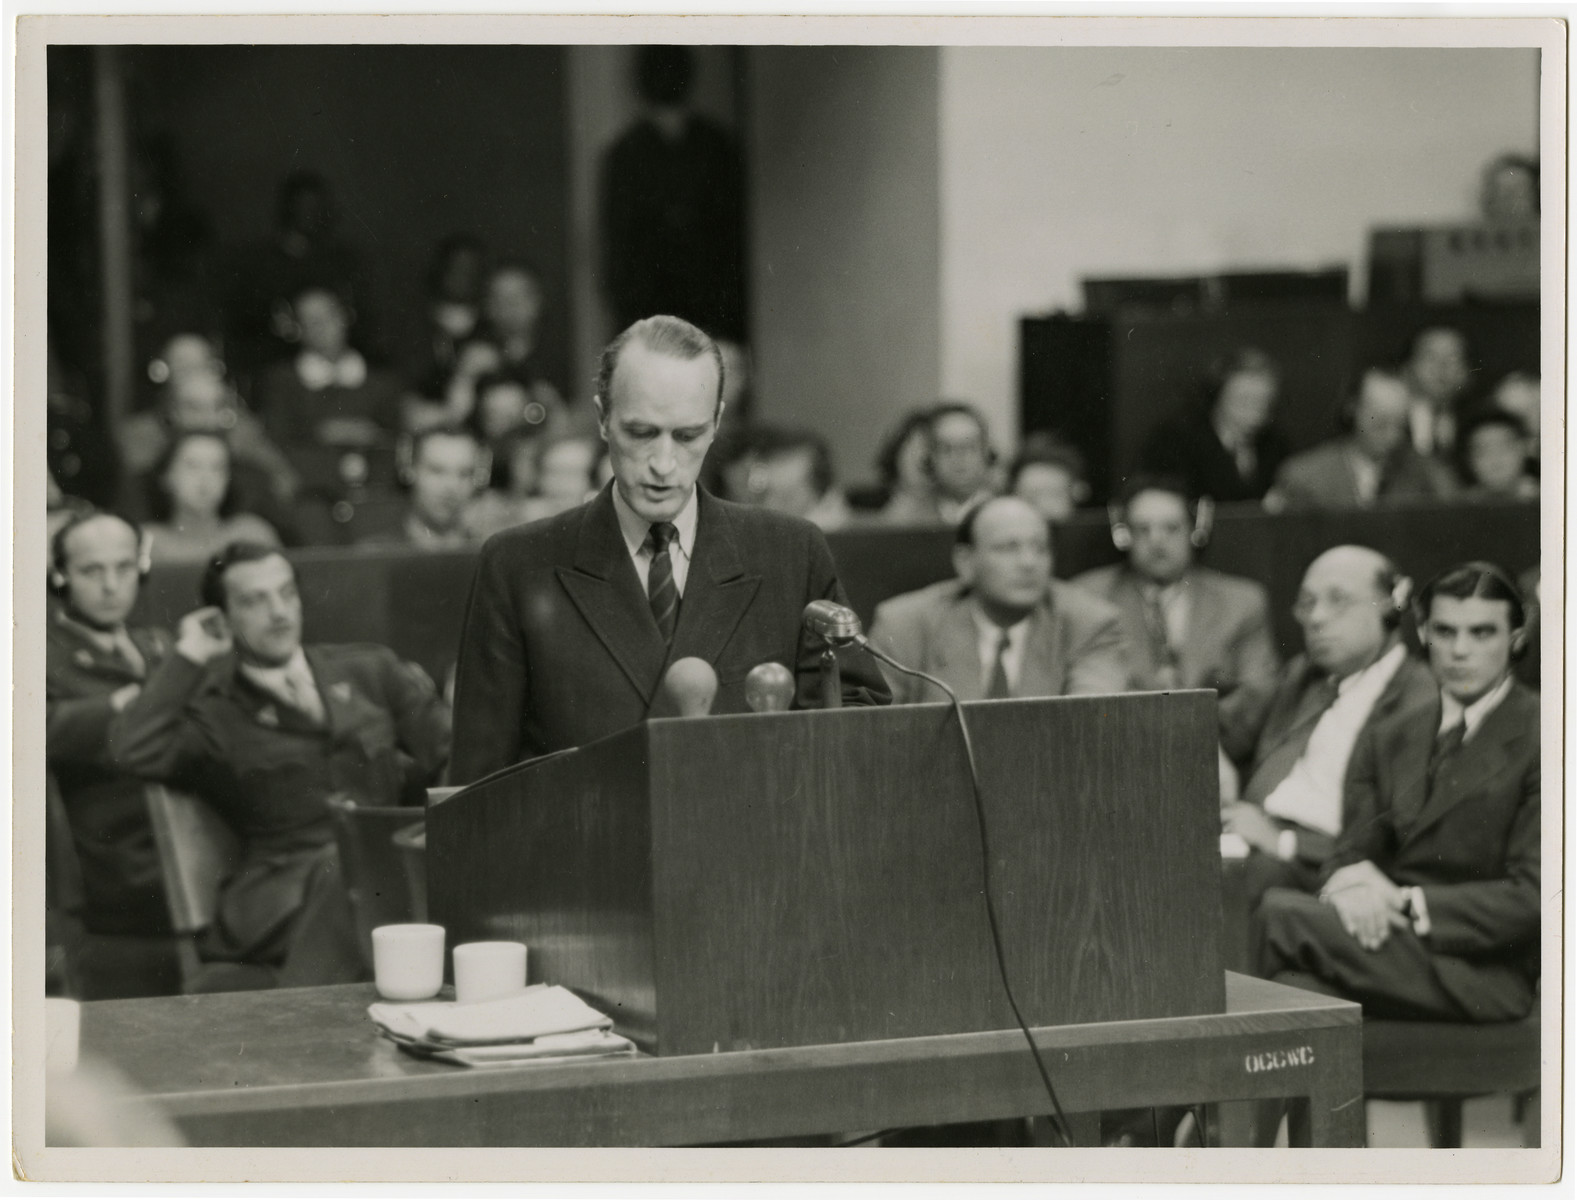 Defendant Alfred Krupp von Bohlen testifies at the Krupp Case war crimes trial.

Seated behind him to his right is Max Austein.